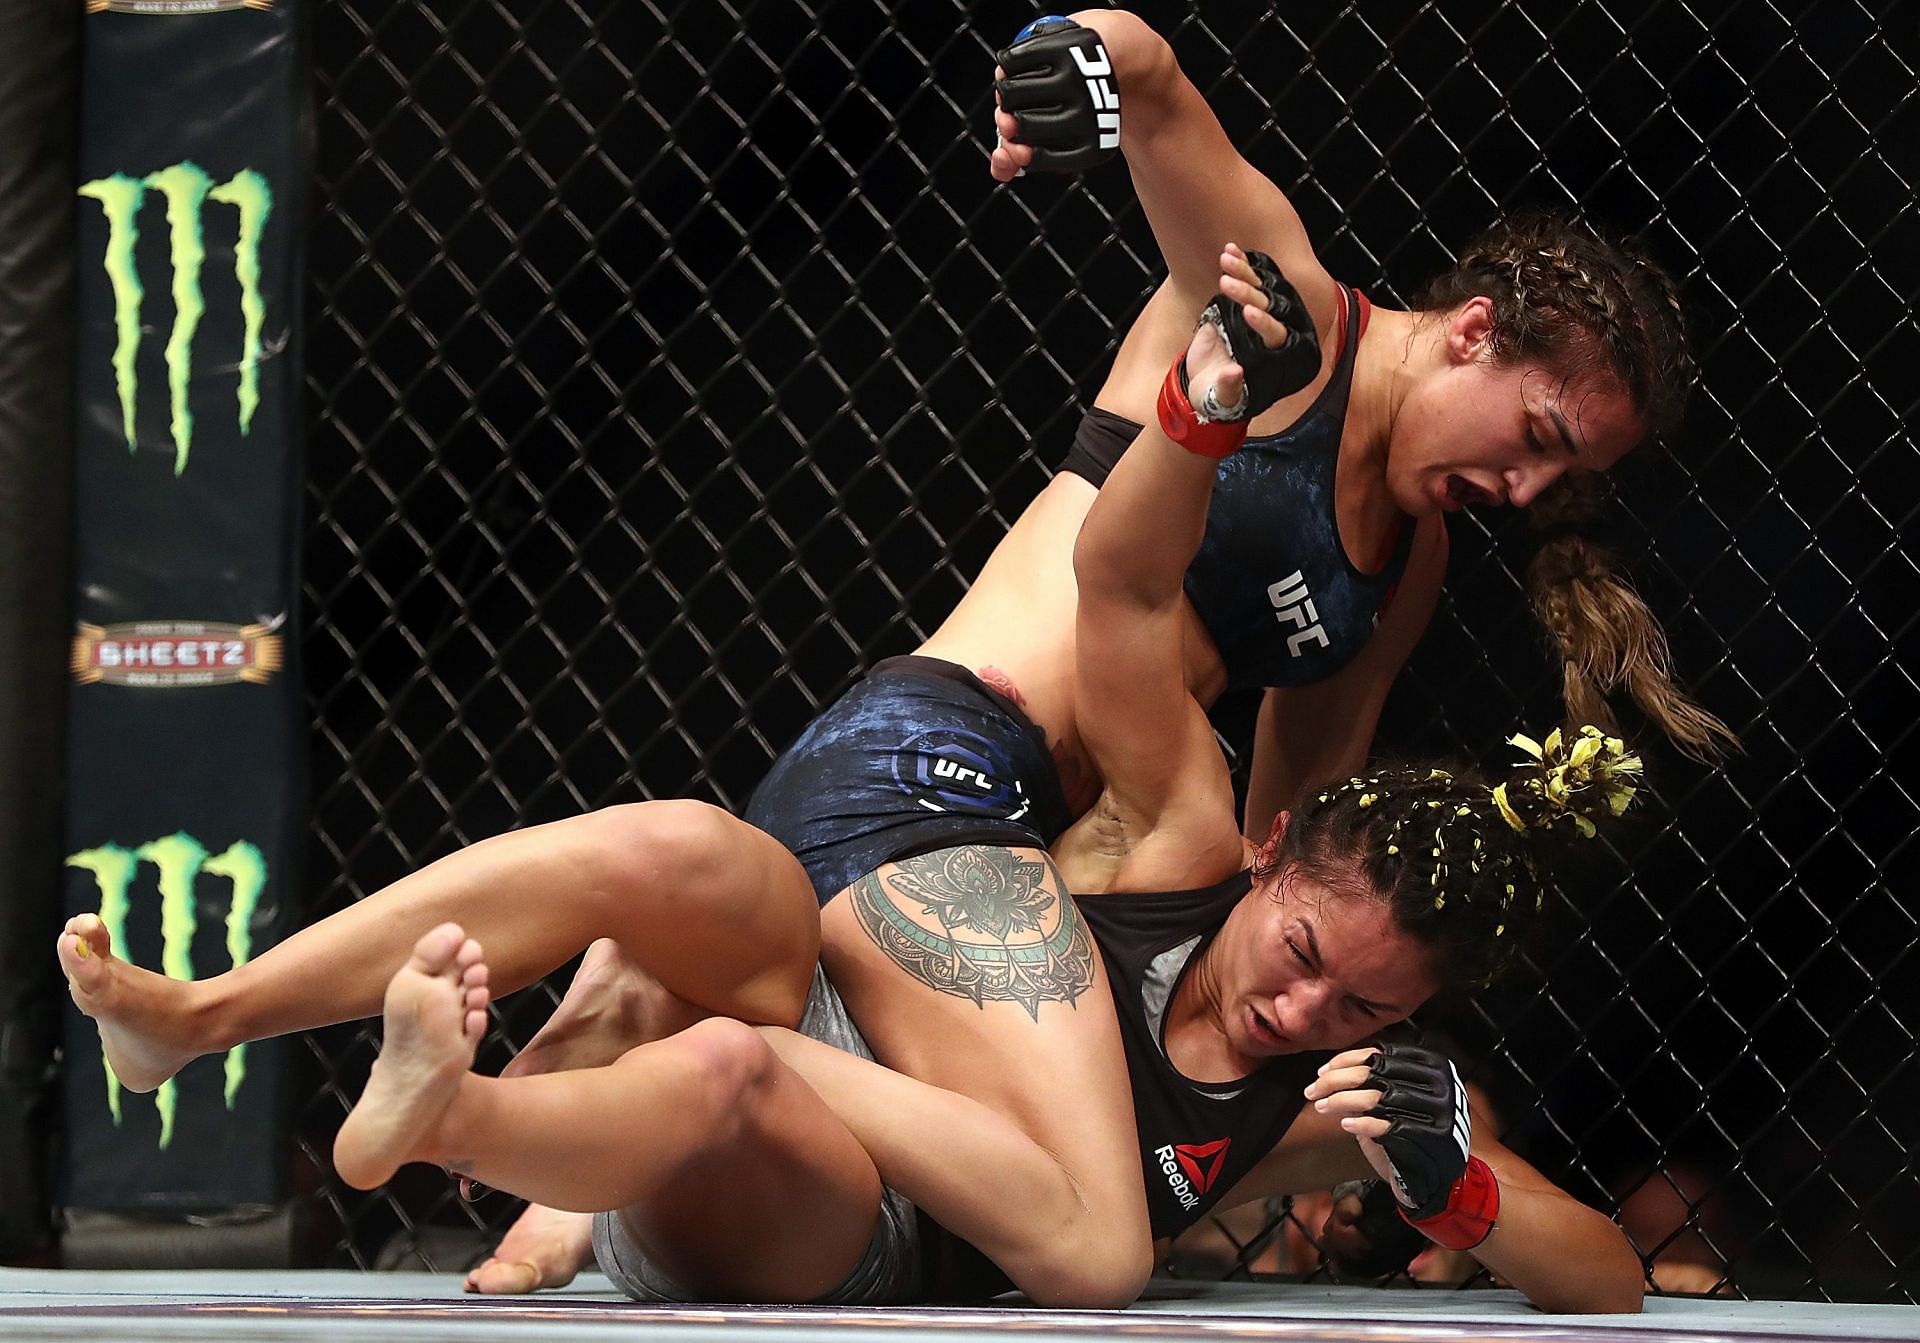 Tatiana Suarez could be a title contender at flyweight or strawweight